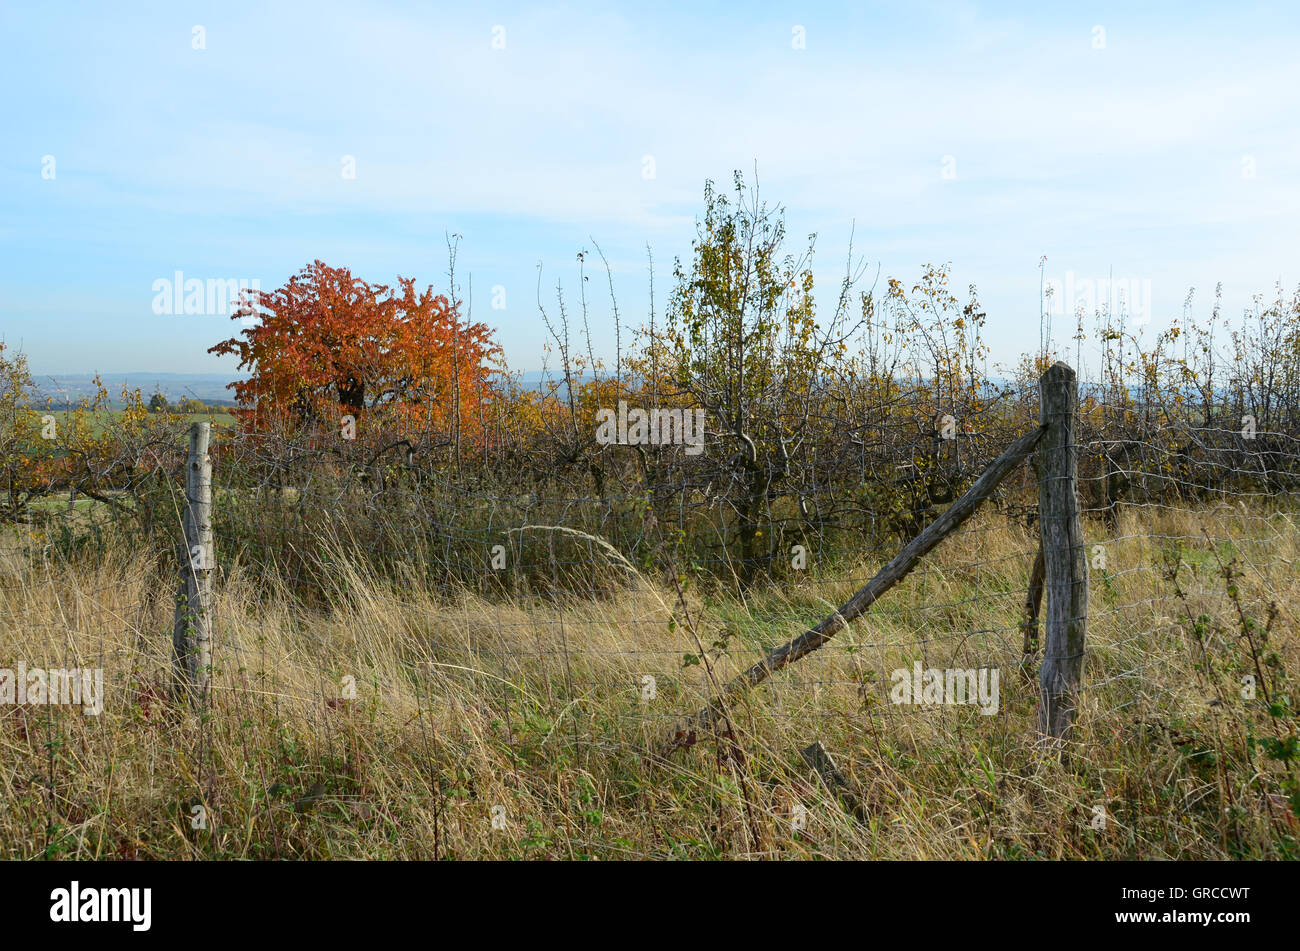 Overgrown Pasture With A Fence In Autumn Stock Photo